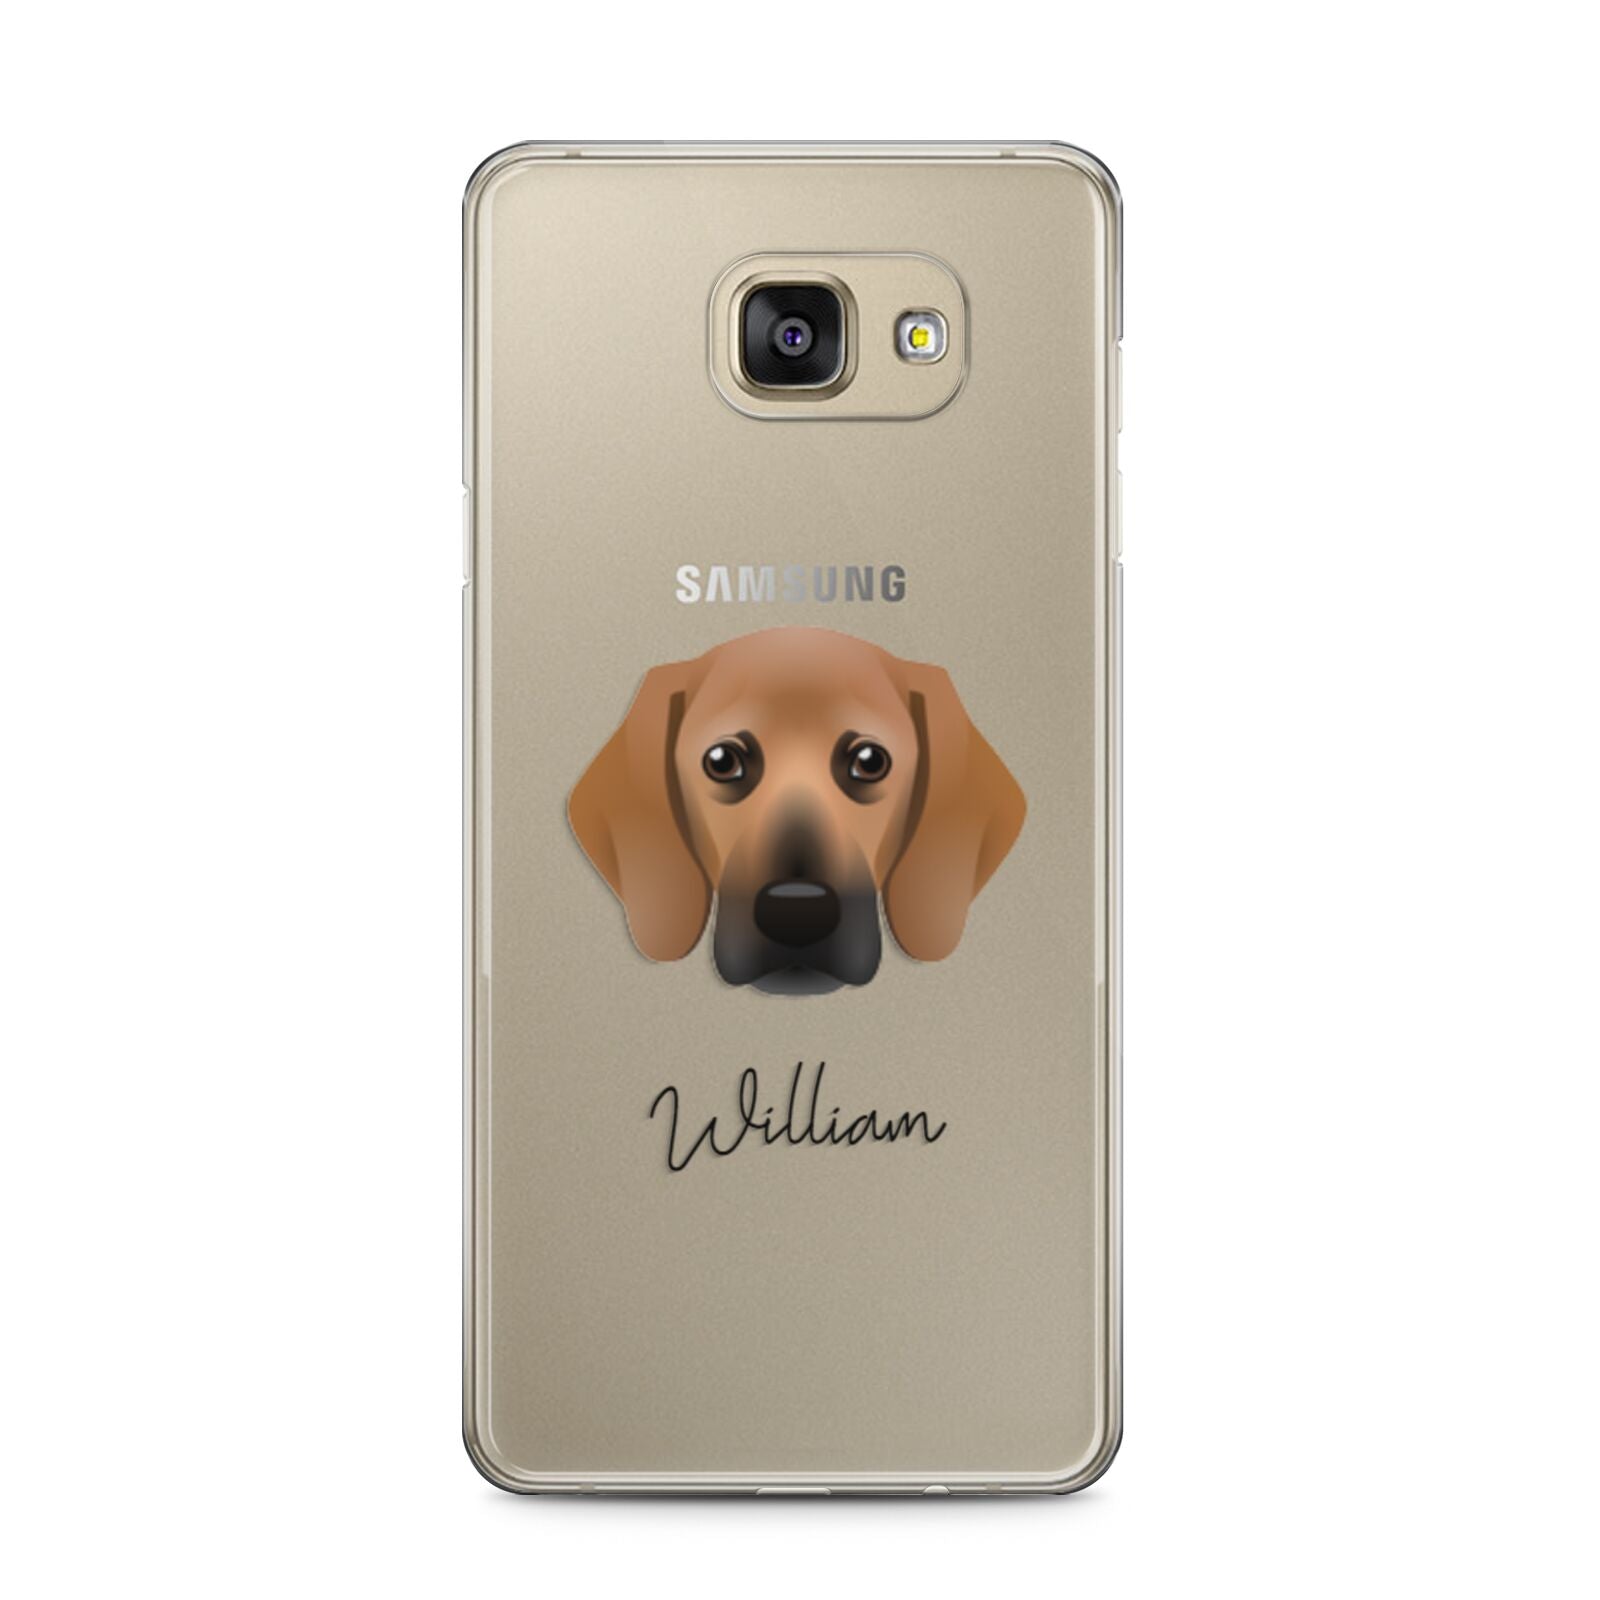 Bassugg Personalised Samsung Galaxy A5 2016 Case on gold phone